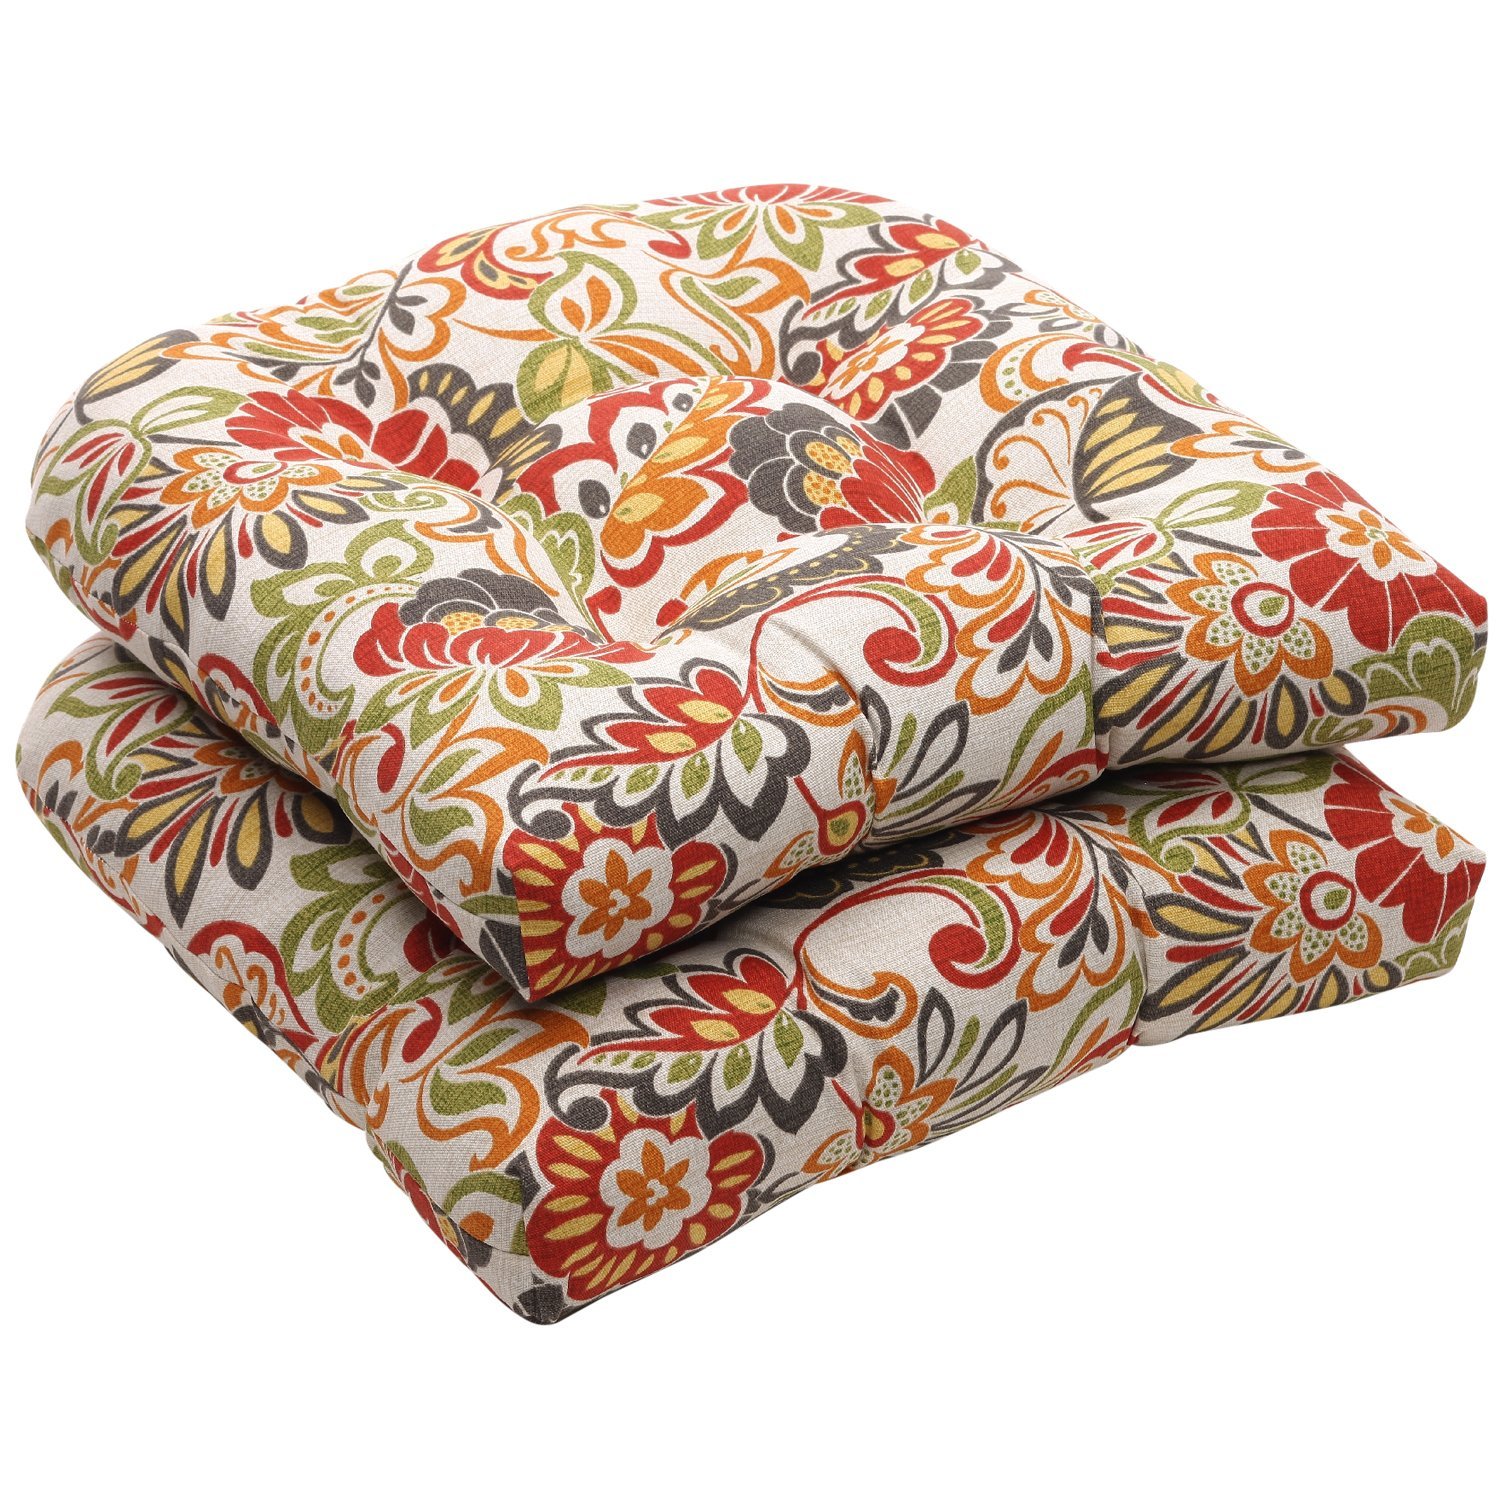 outdoor chair cushions amazon.com: pillow perfect indoor/outdoor multicolored modern floral wicker seat  cushions, 2-pack: home u0026 kitchen PUQANDH